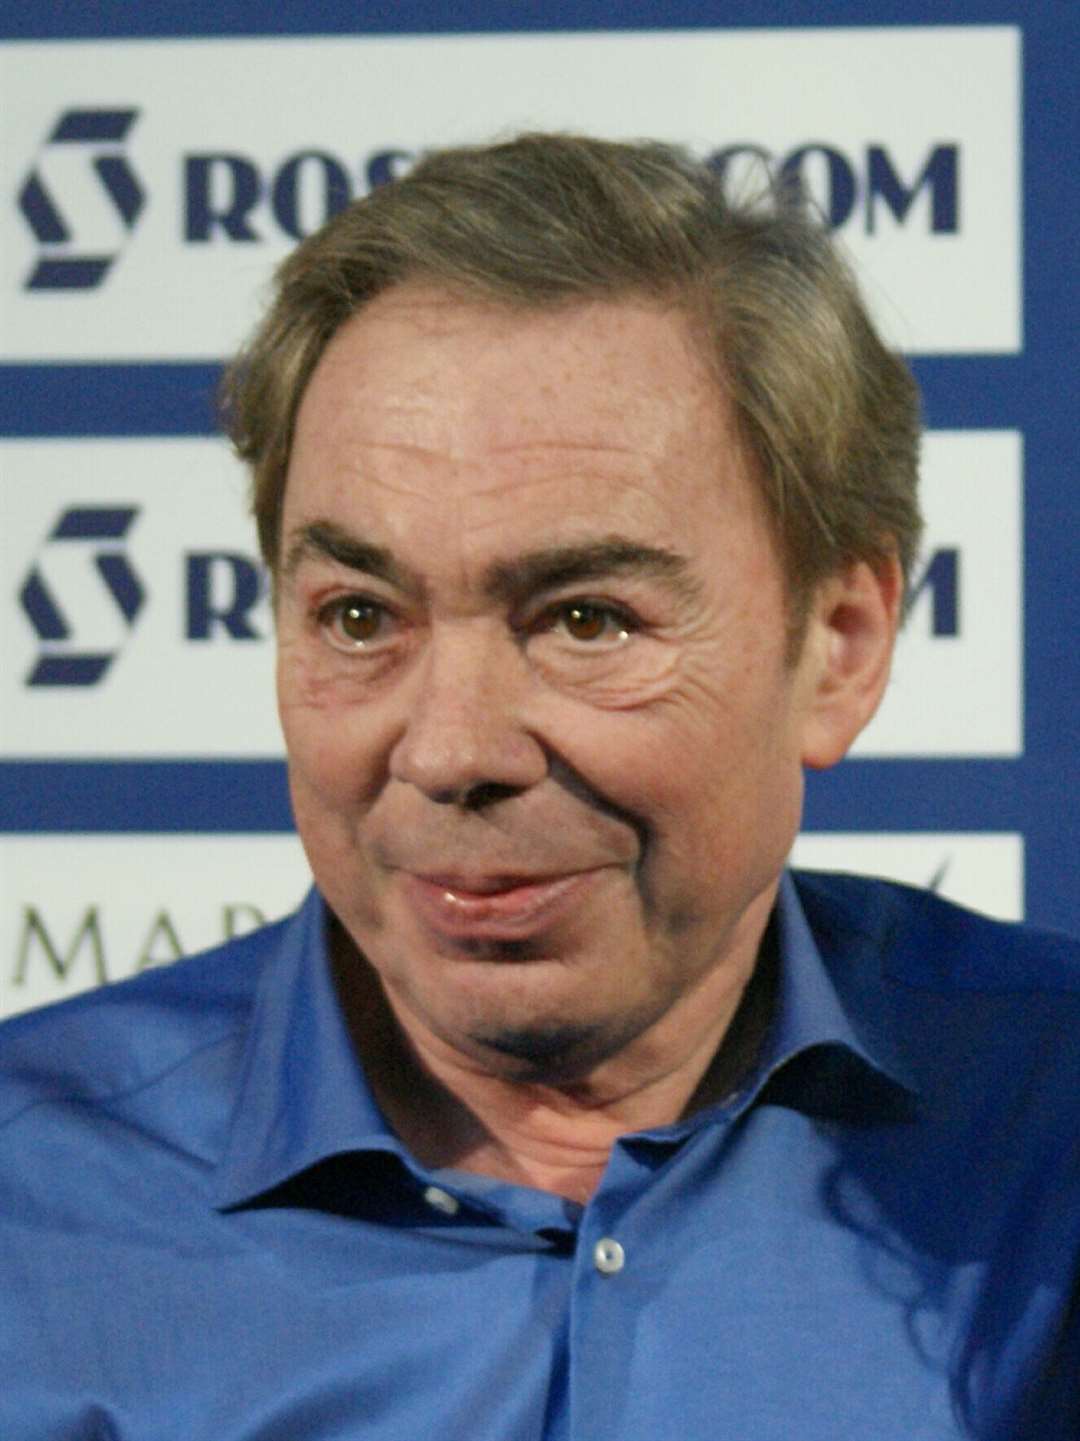 Andrew Lloyd Webber is making his shows live to stream for 48 hours